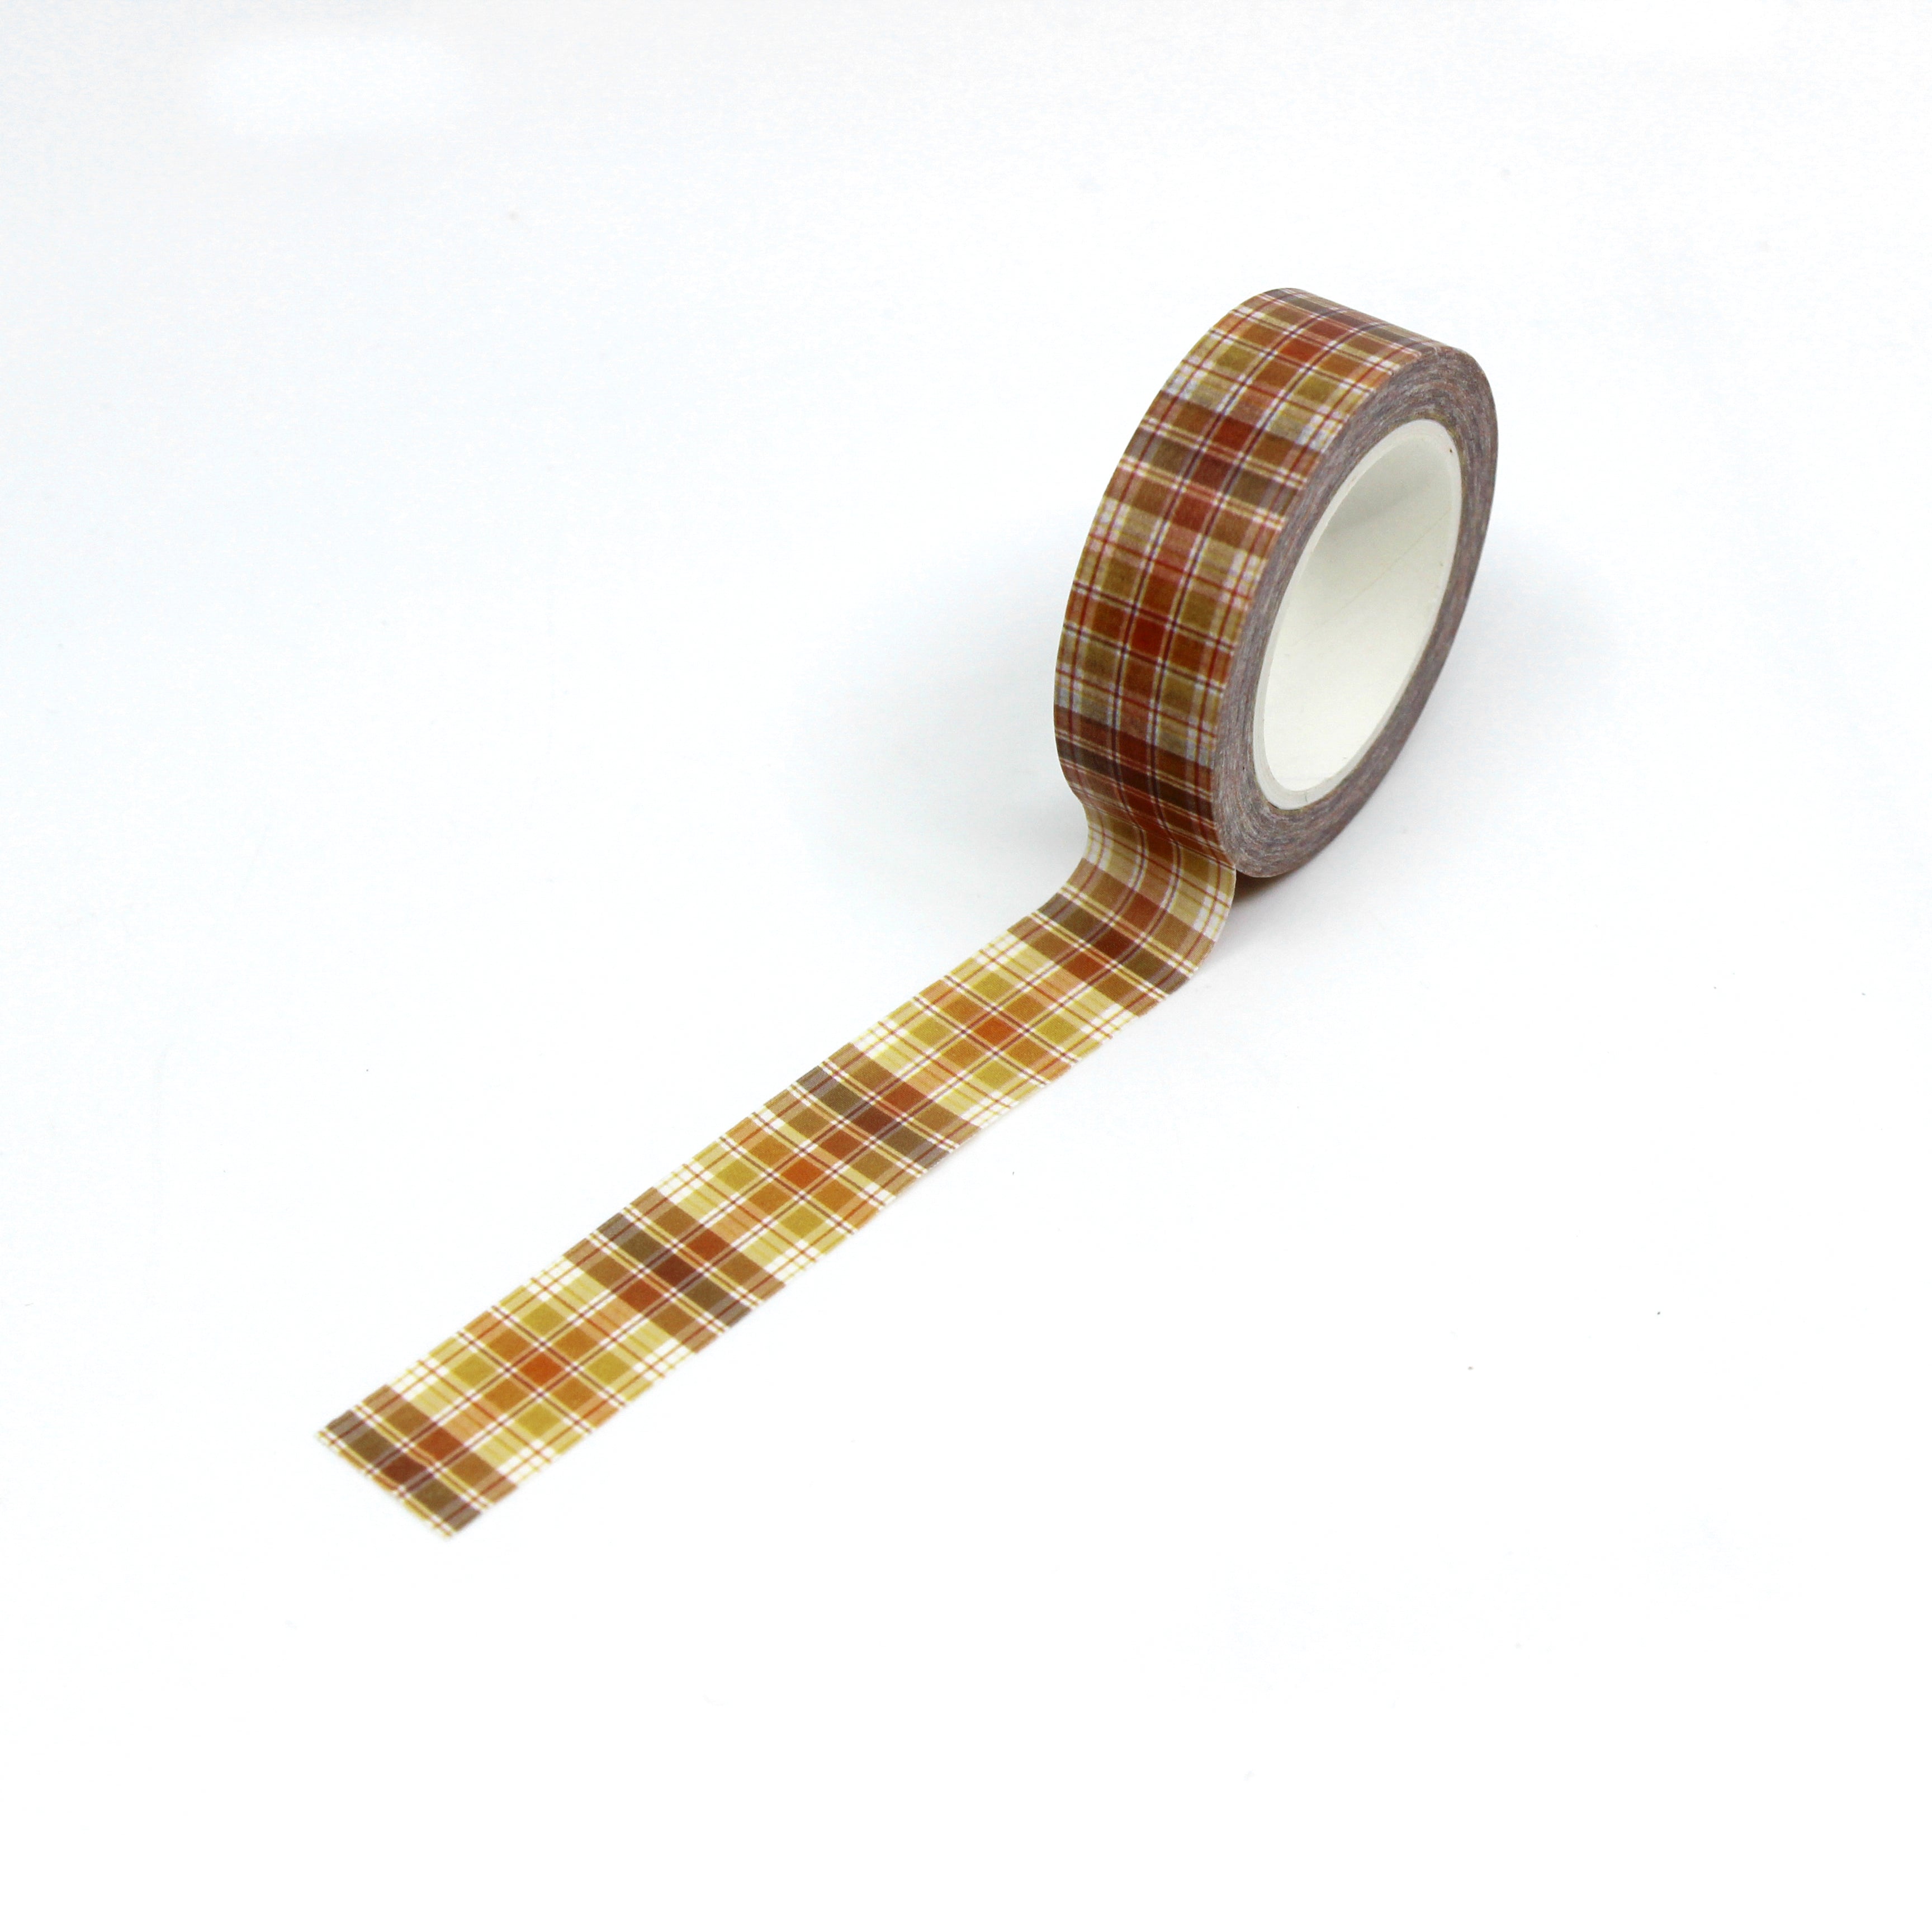  Yellow Spring Plaid Washi Tape: Brighten up your spring crafts with our Yellow Spring Plaid Washi Tape. This tape features a charming plaid pattern in cheerful yellow tones, perfect for adding a touch of sunshine to your projects. Use it to decorate cards, scrapbook pages, or gift wrap, and bring a pop of color to your springtime creations.